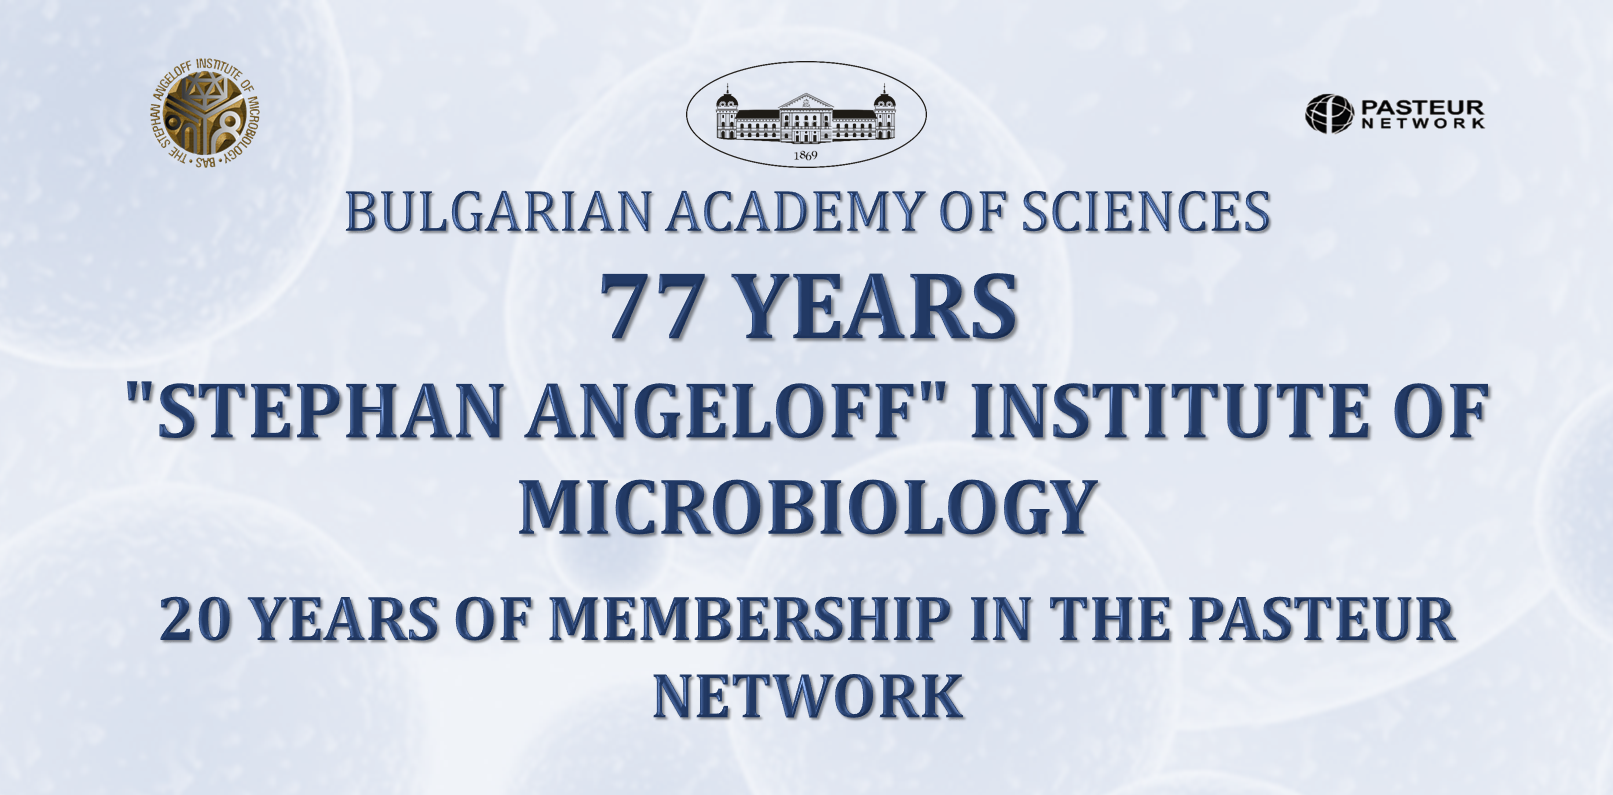 Stefan Angeloff Institute of Microbiology at the Bulgarian Academy of Sciences celebrates its 77th anniversary of establishment and 20th anniversary of membership in the Pasteur Network